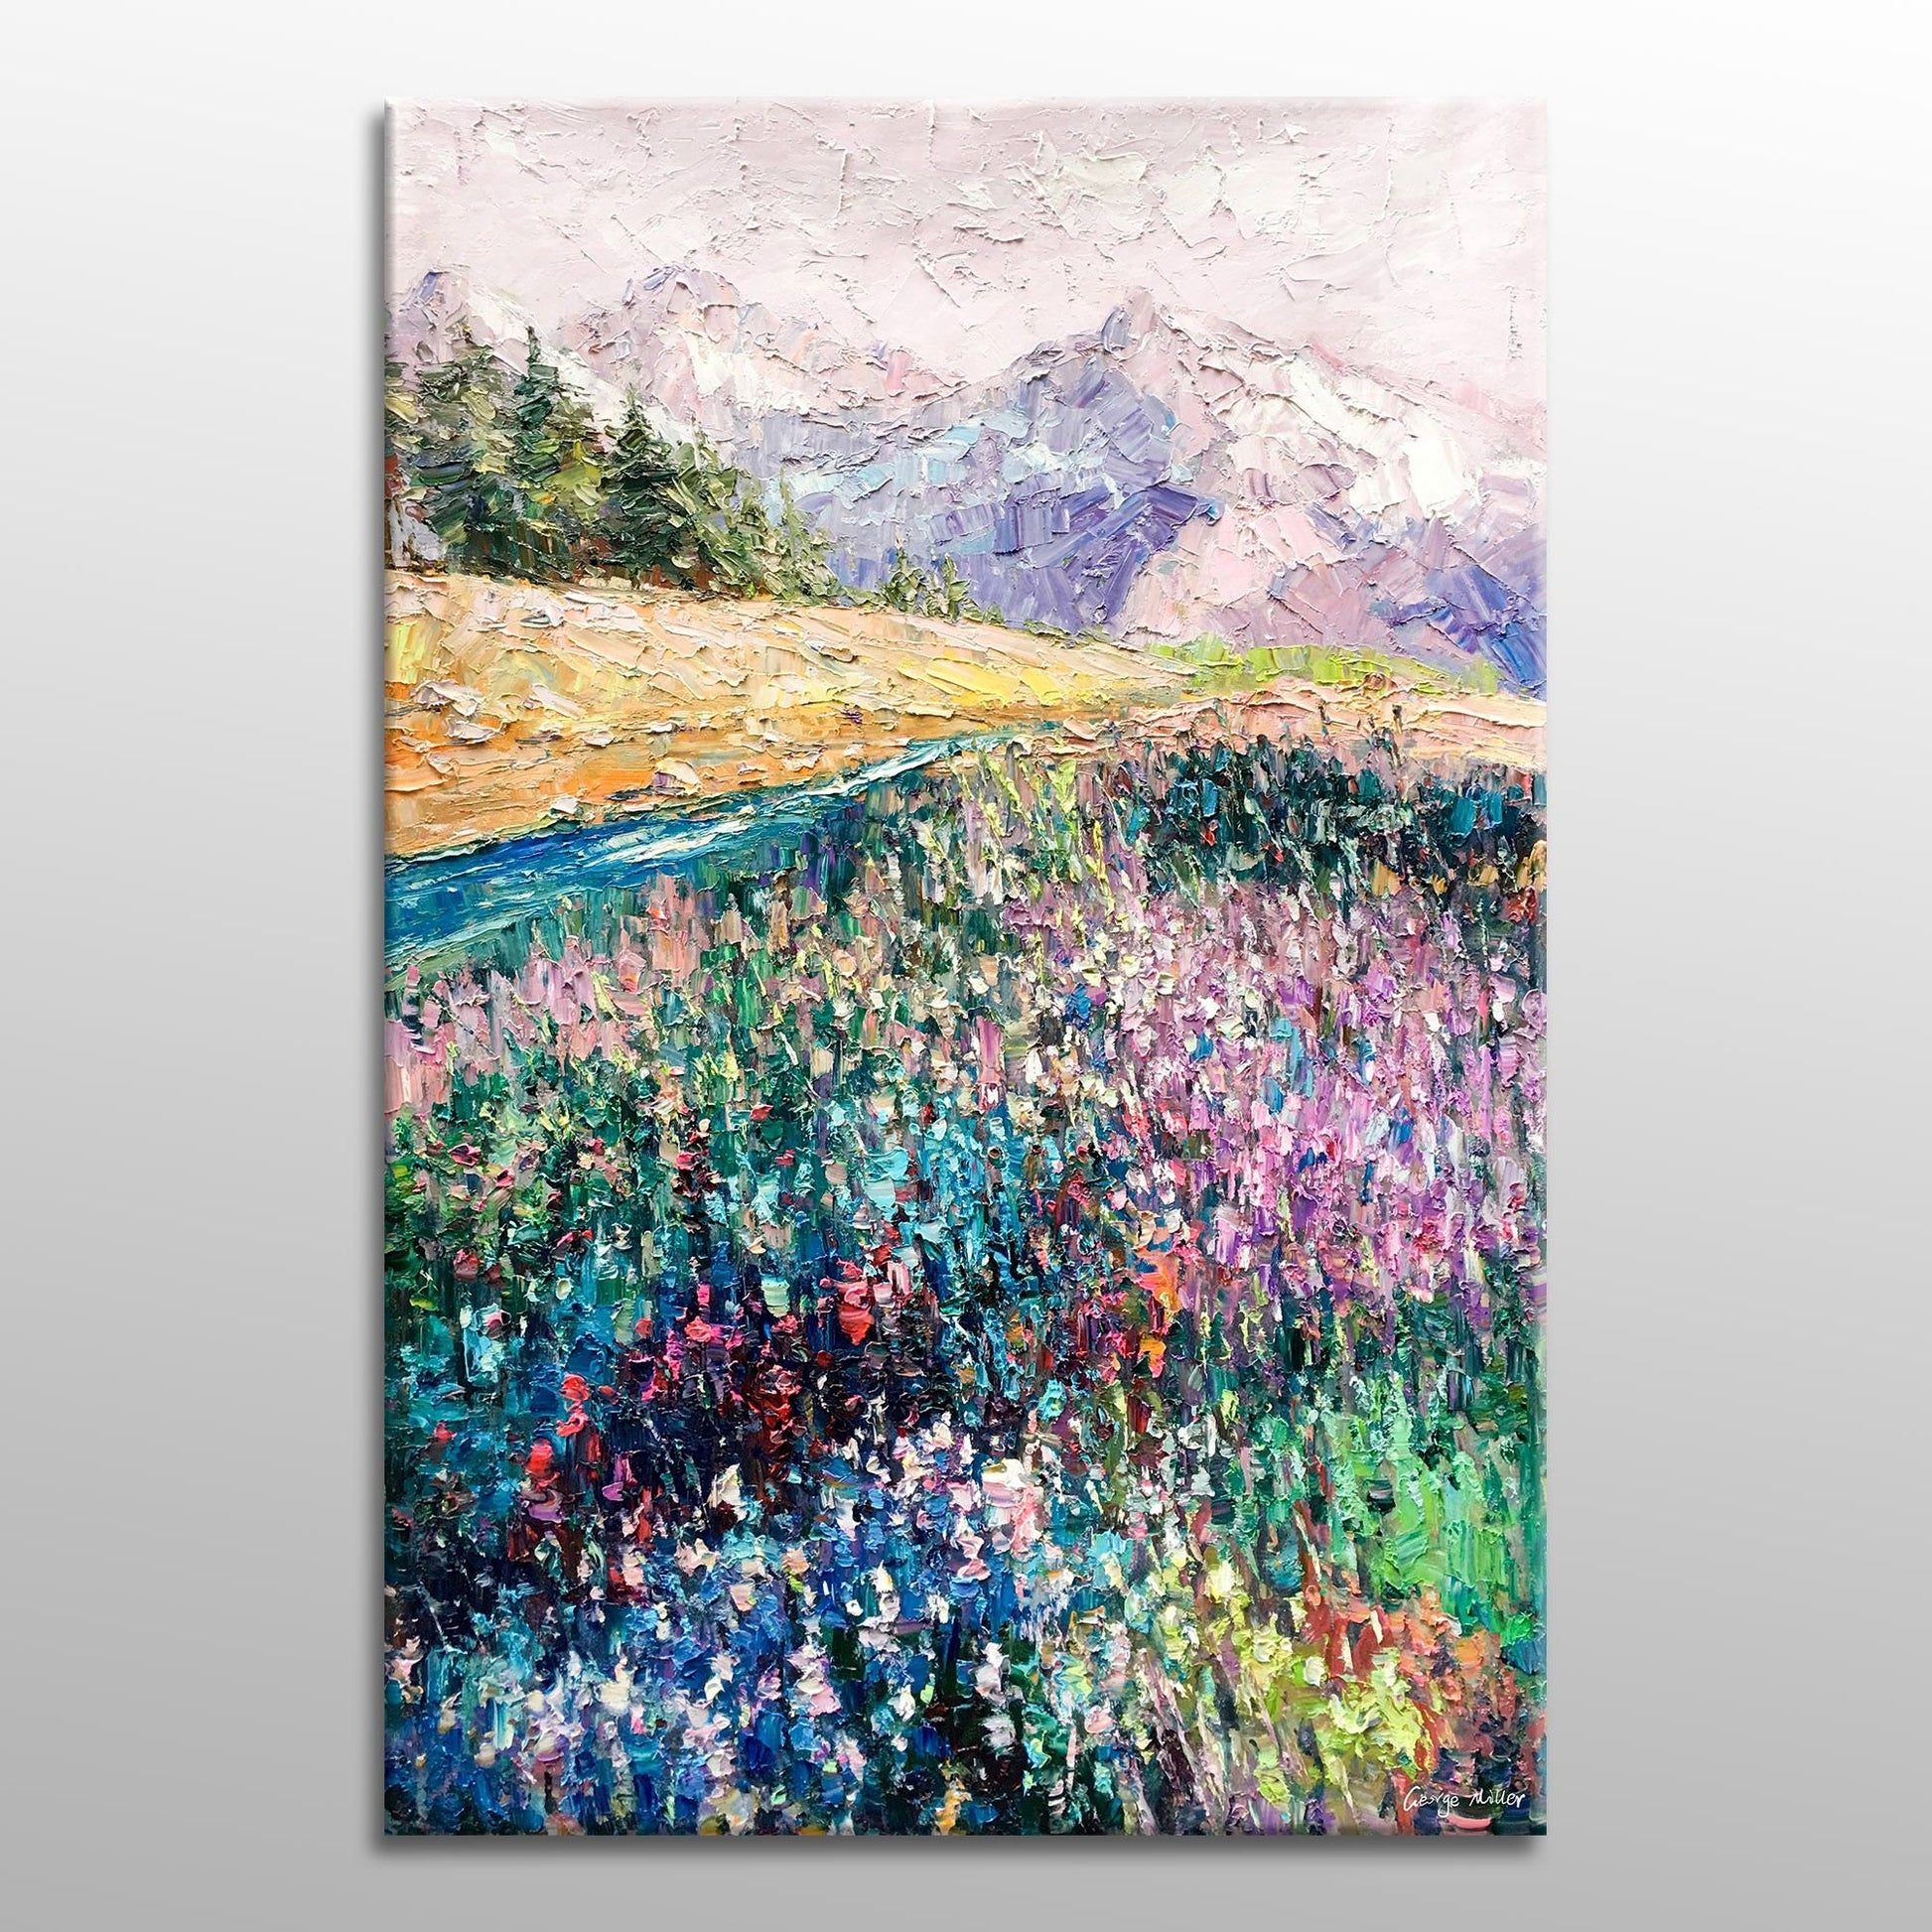 Landscape Oil Painting Spring by the Mountain, Oil Painting Abstract, Large Canvas Art, Large Wall Art Painting, Original Painting Knife Art